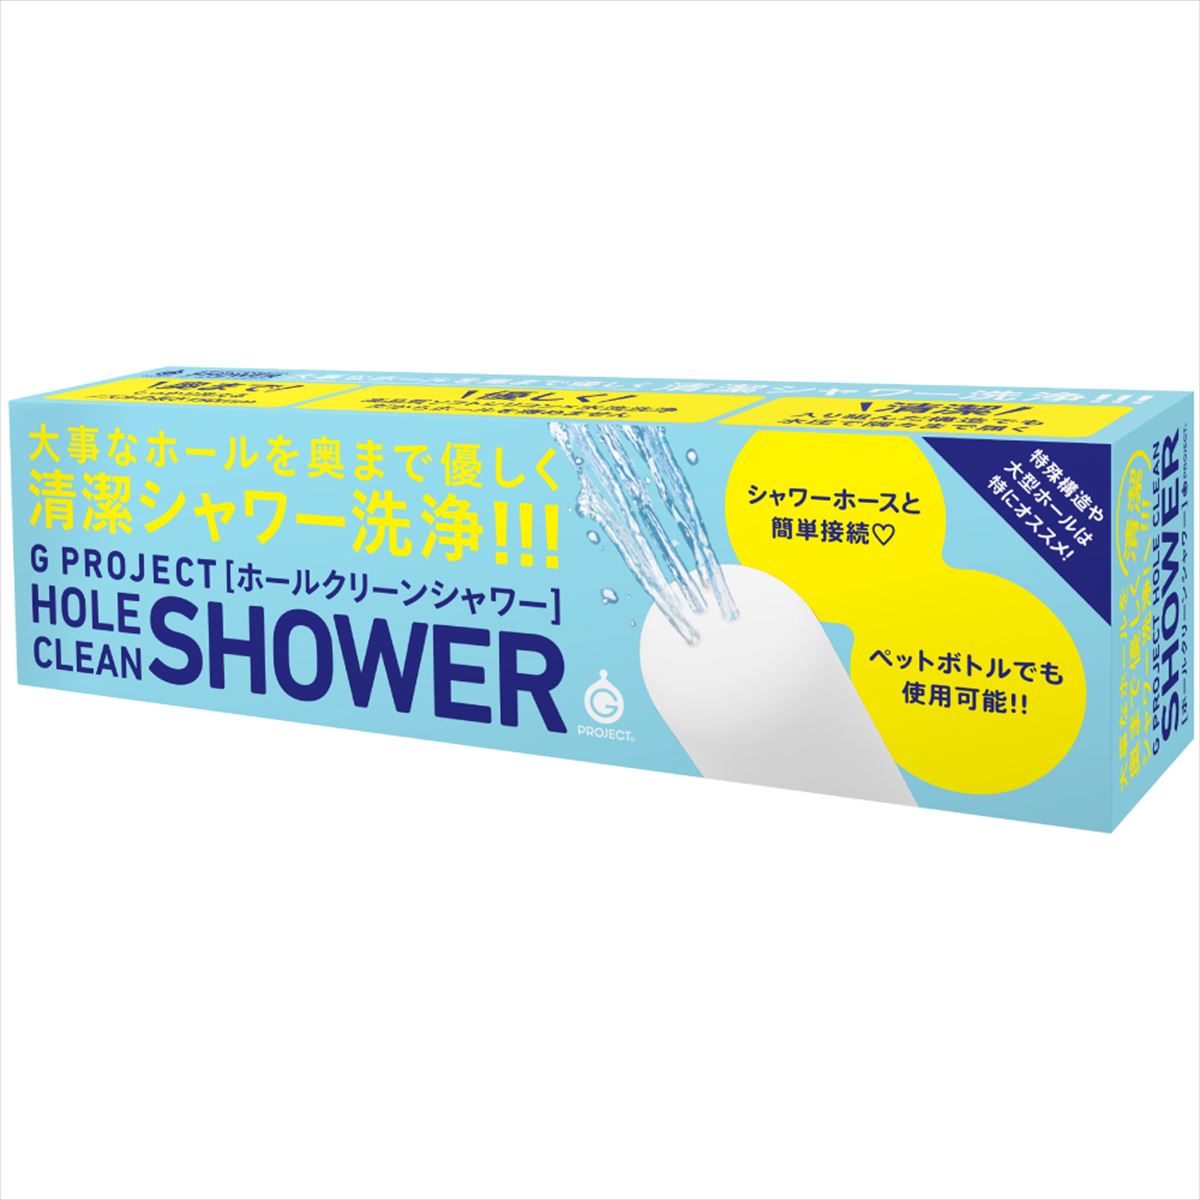 G PROJECT HOLE CLEAN SHOWER [ΰ ذ ܰ]